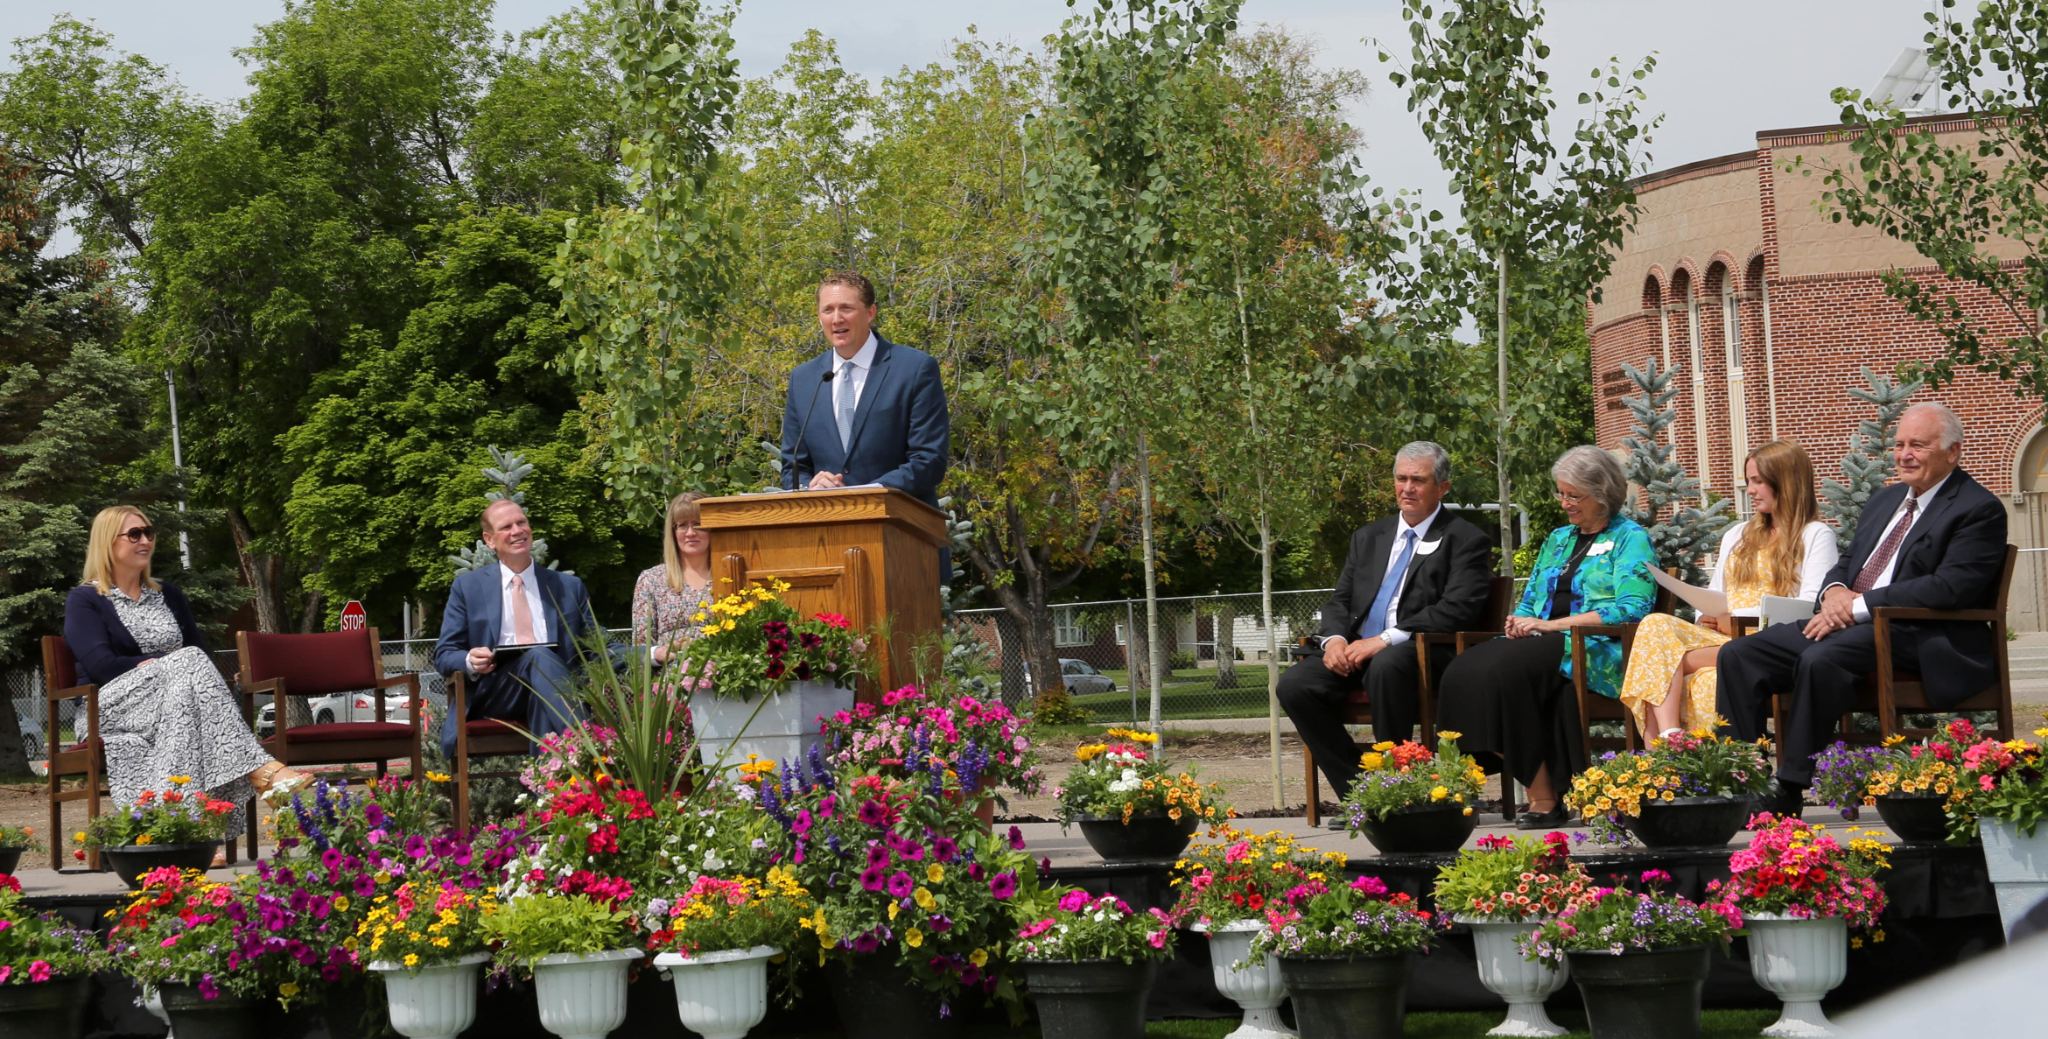 Elder Ryan K. Olsen, a man wearing a suit and tie, speaking from a pulpit outside, with many flower pots on the ground around him.